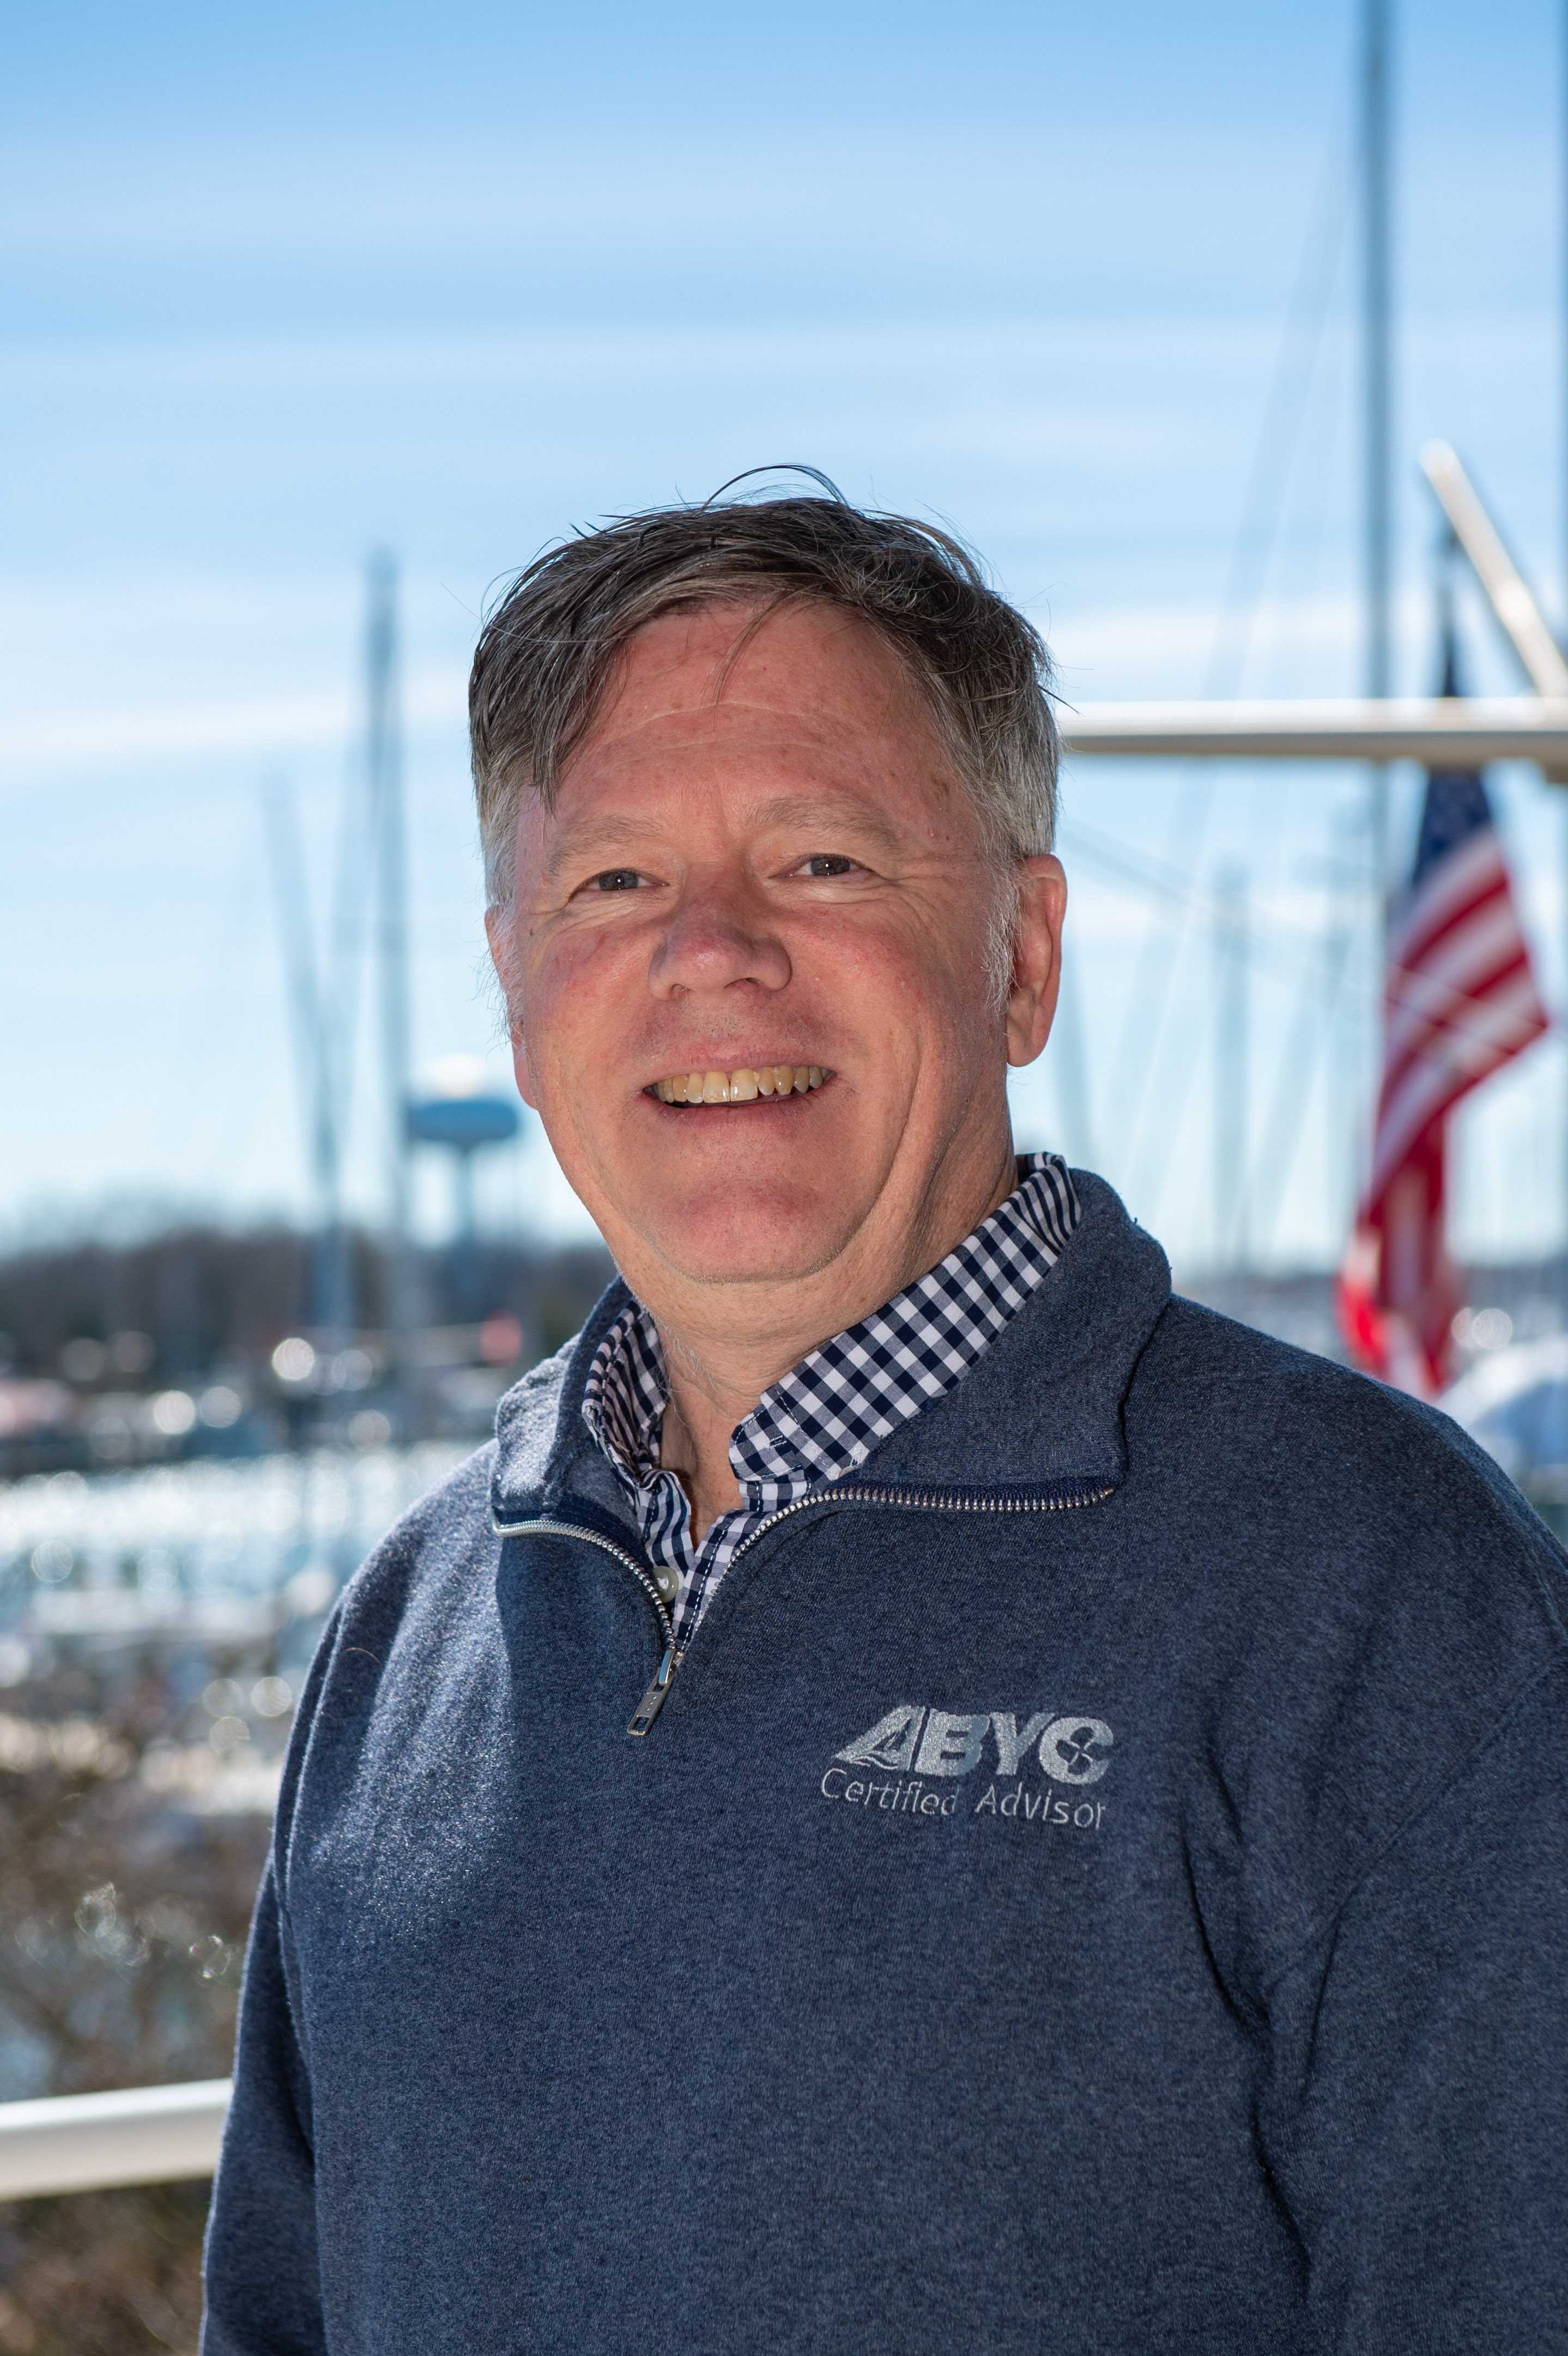 American Boat & Yacht Council management changes